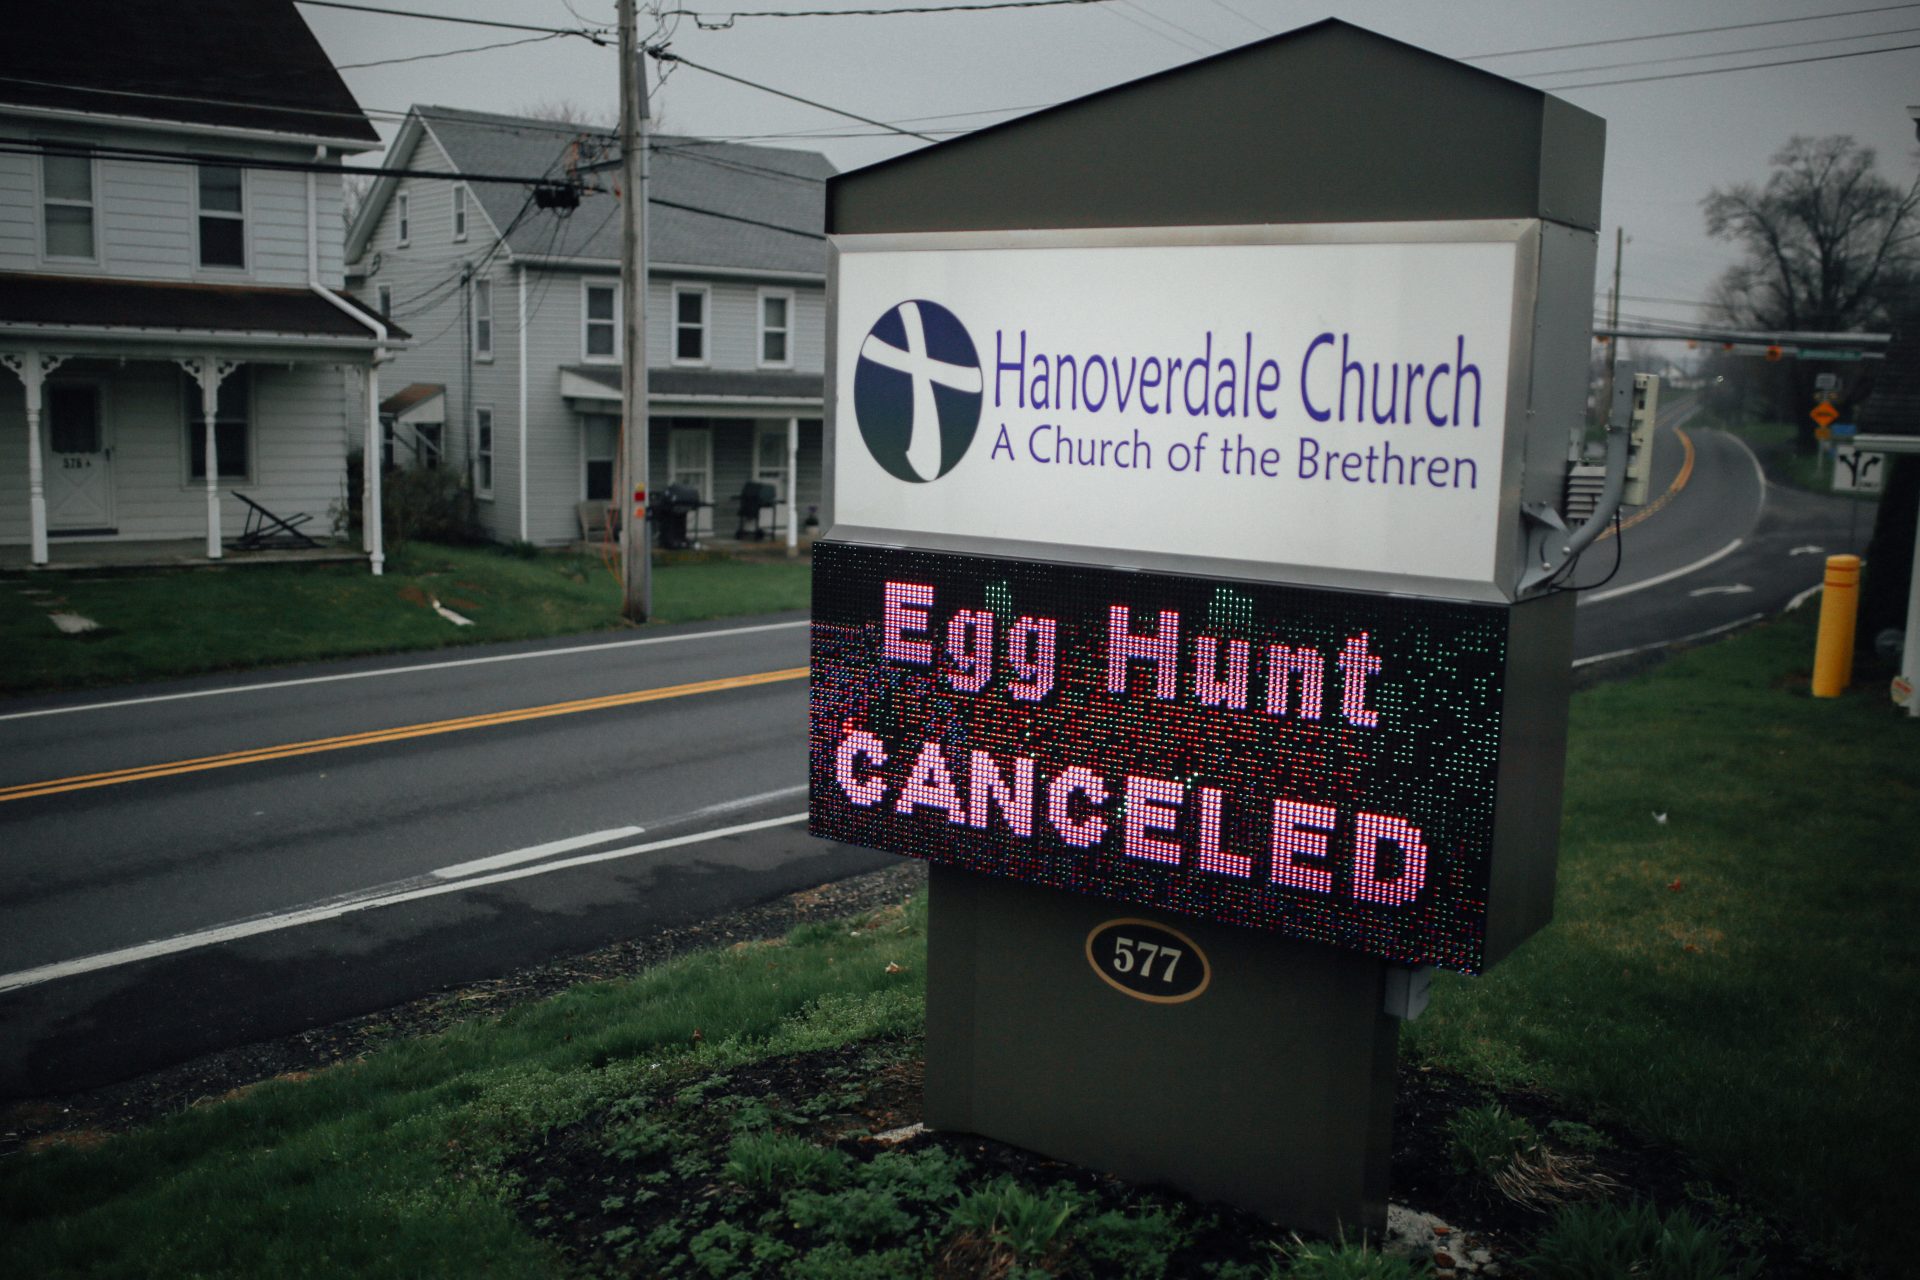 The Easter Egg Hunt is canceled at the Hanoverdale Church of the Brethren in Hummelstown. April 1, 2020